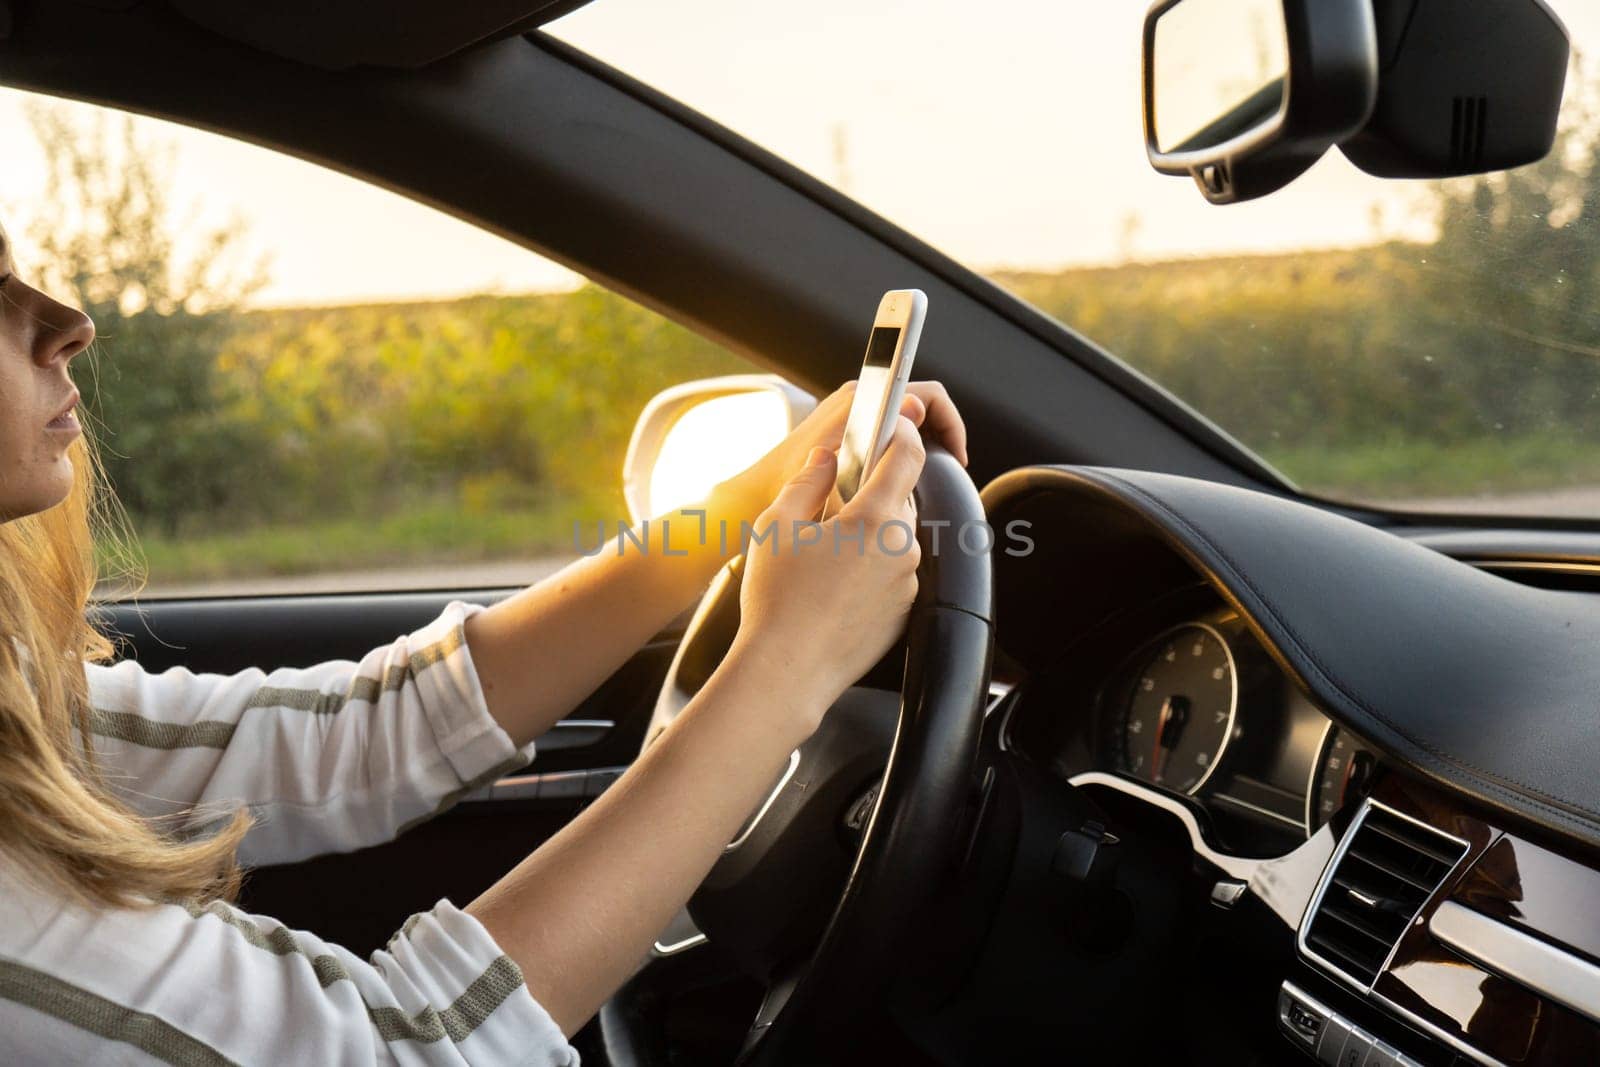 Woman sending messages with smartphone while driving automobile. Female driver using mobile phone on the road during driving the car. Safety and technology concept